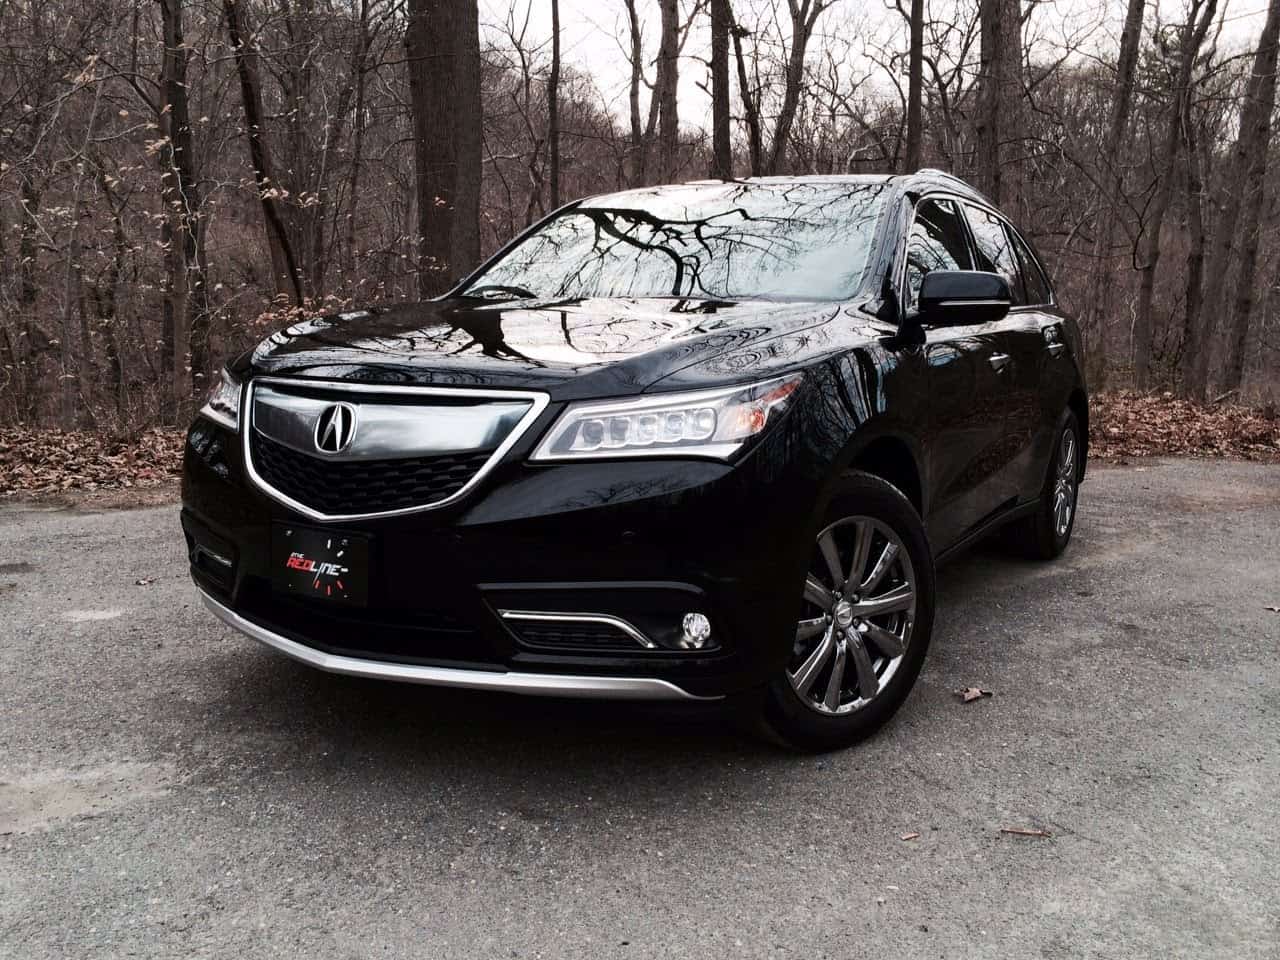 2014 Acura MDX Car Review Video in Lakeland Florida